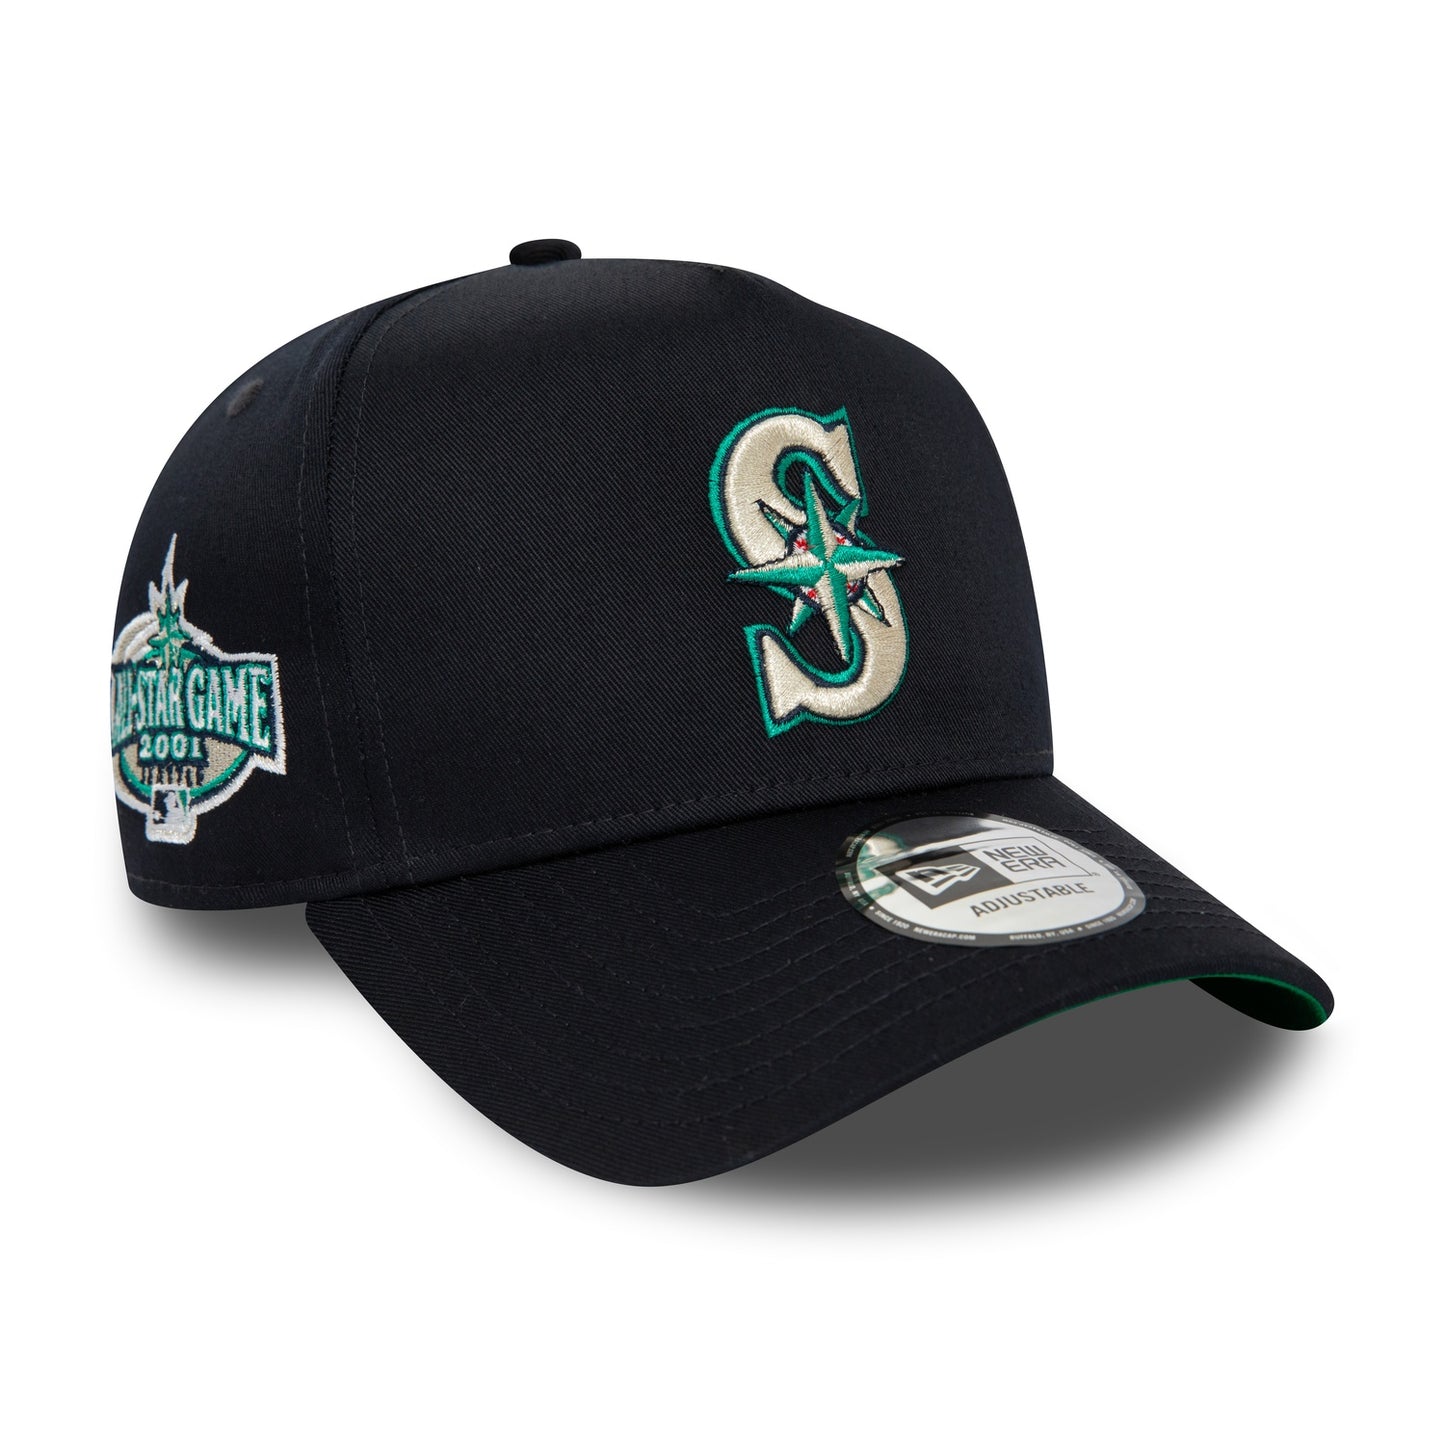 NEW ERA 9FORTY A-FRAME MLB SEATTLE MARINERS ALL STAR GAME 2001 NAVY / KELLY GREEN UV SNAPBACK CAP